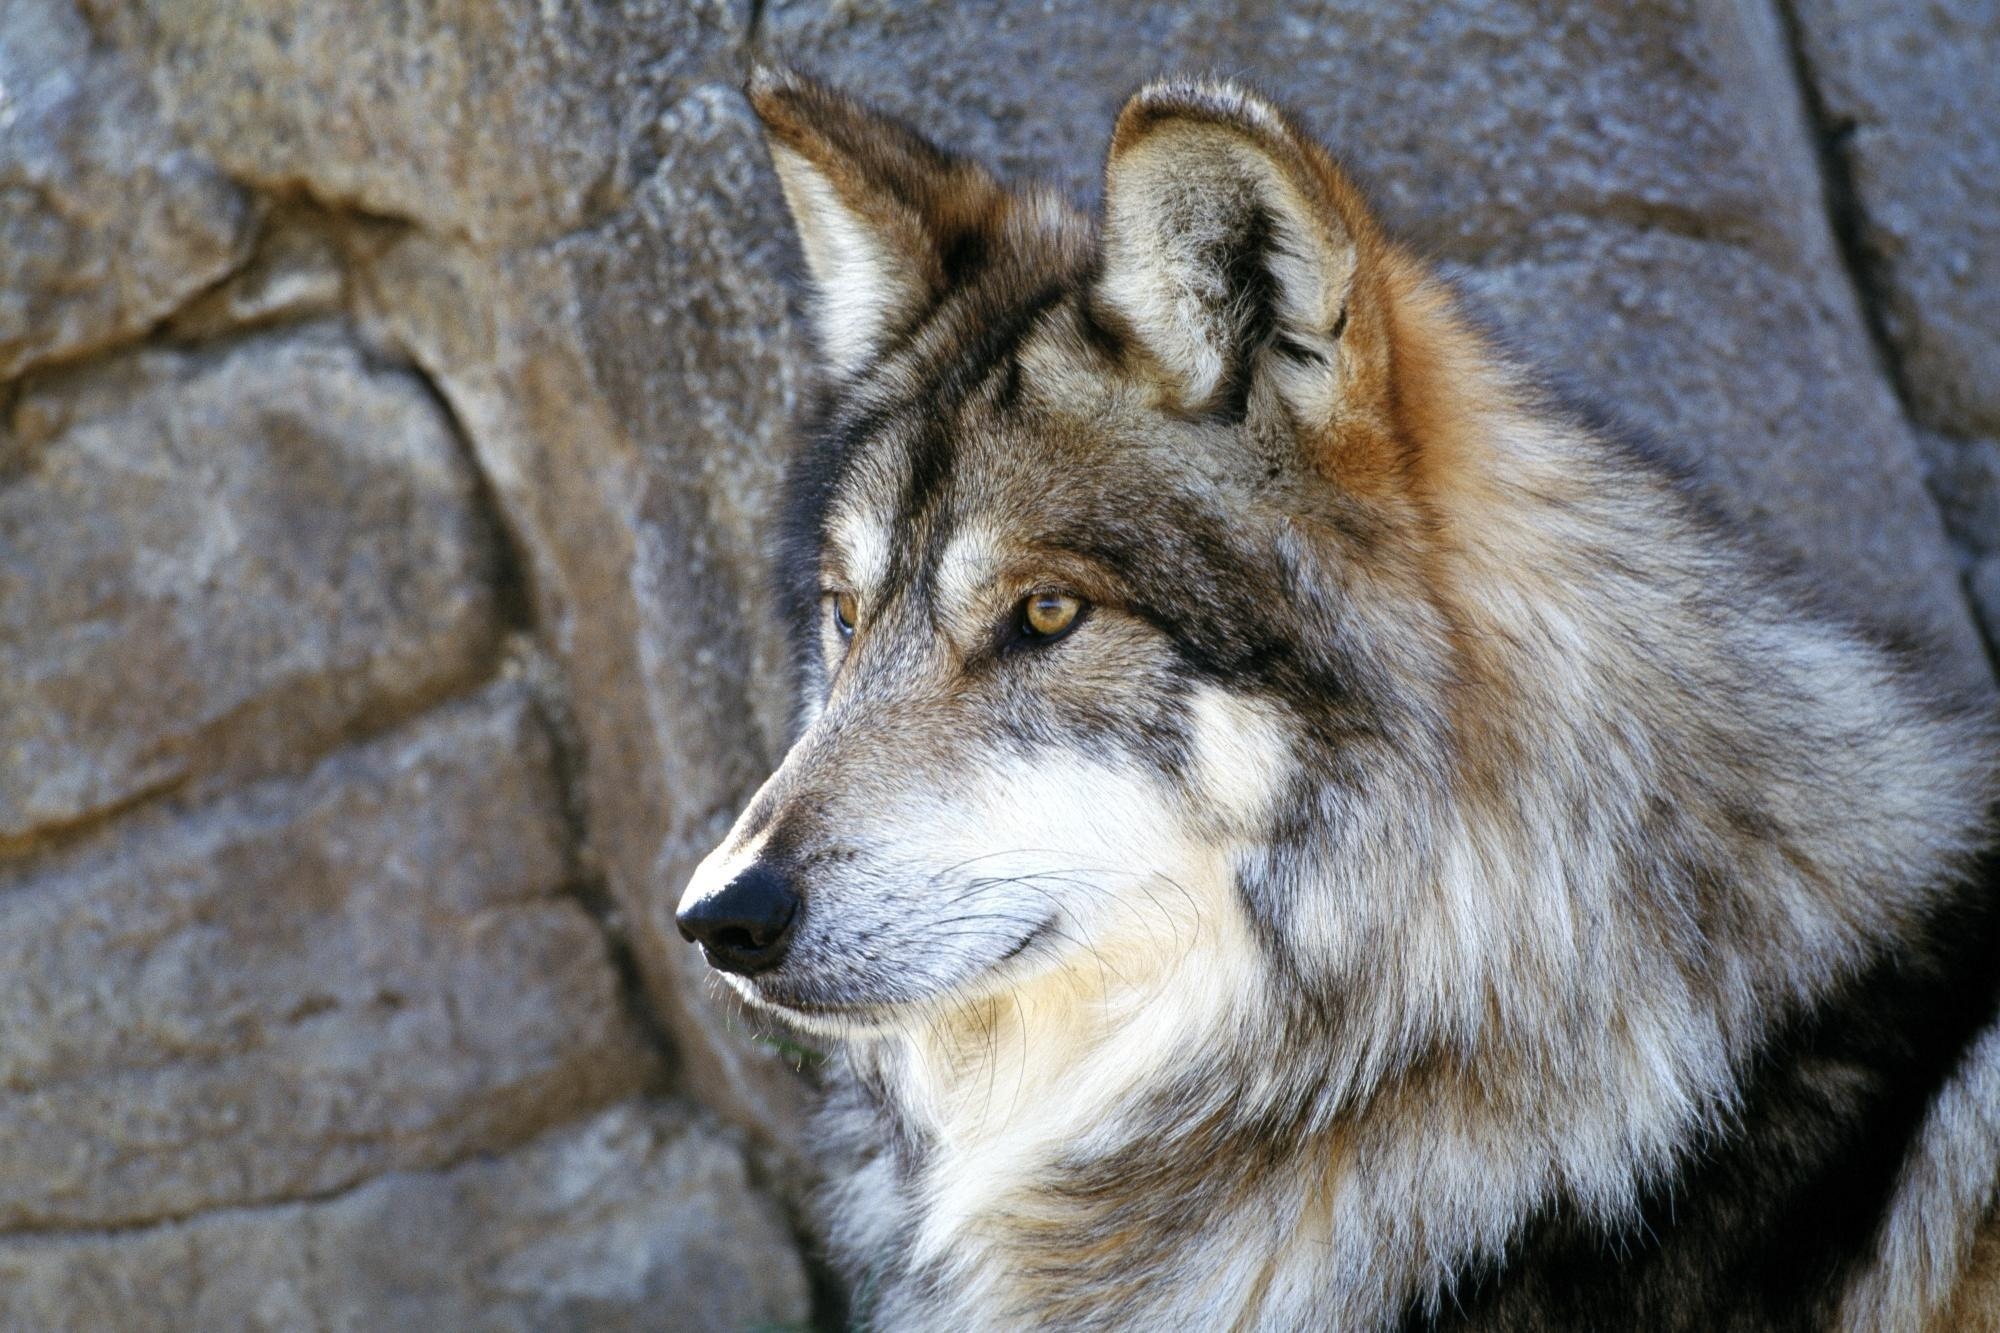 Close-up of a majestic gray wolf's face.